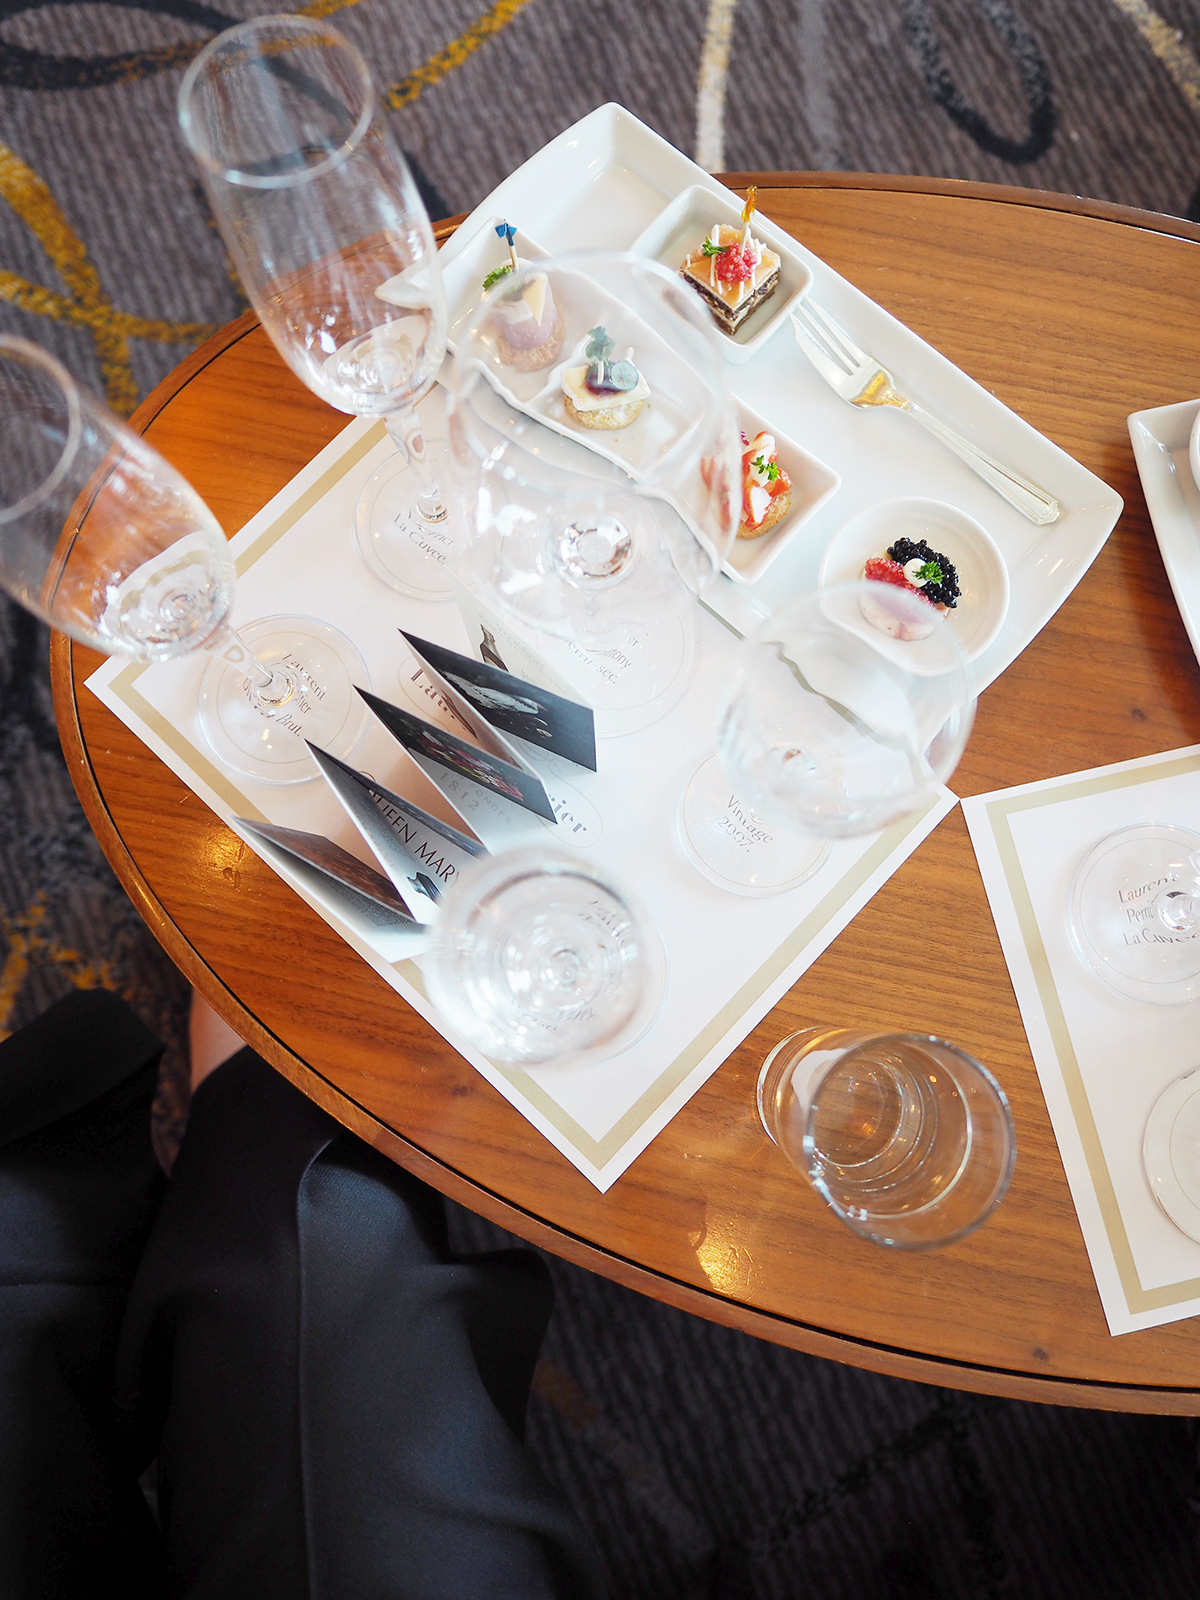 Cunard lauent perrier champagne masterclass